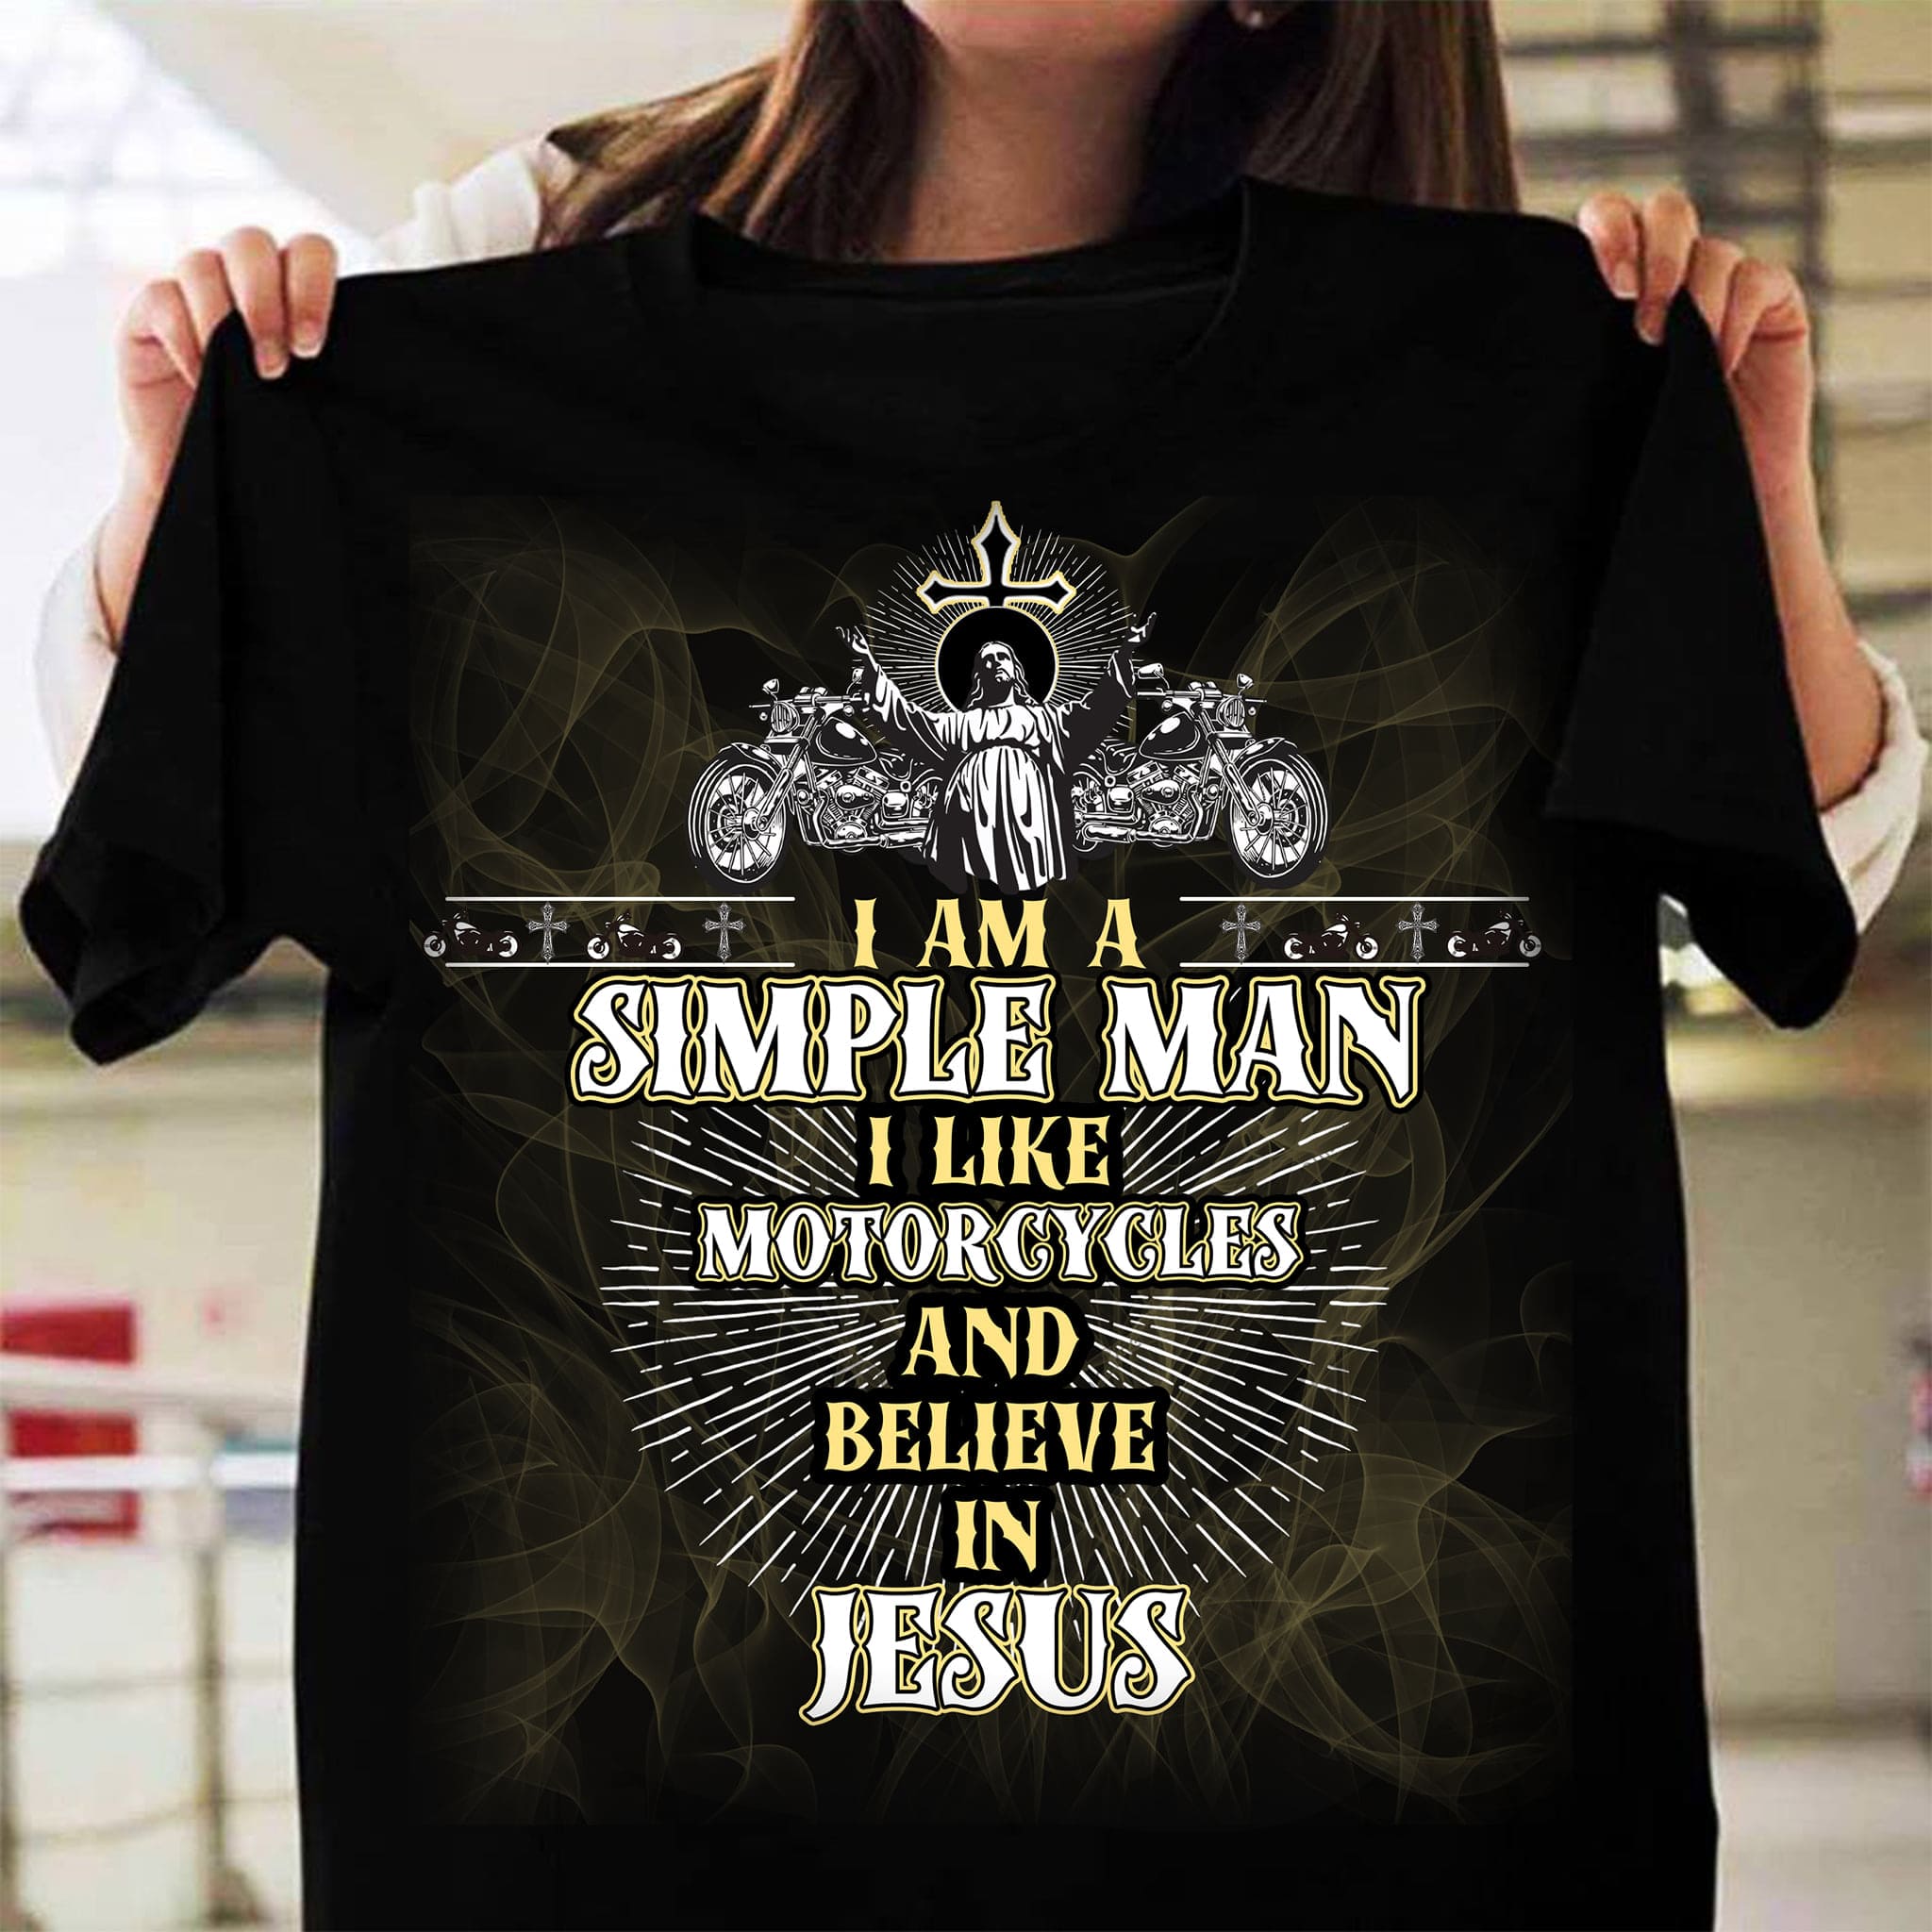 I am a simple man I like motorcycles and believe in Jesus - Motorcycles and Jesus